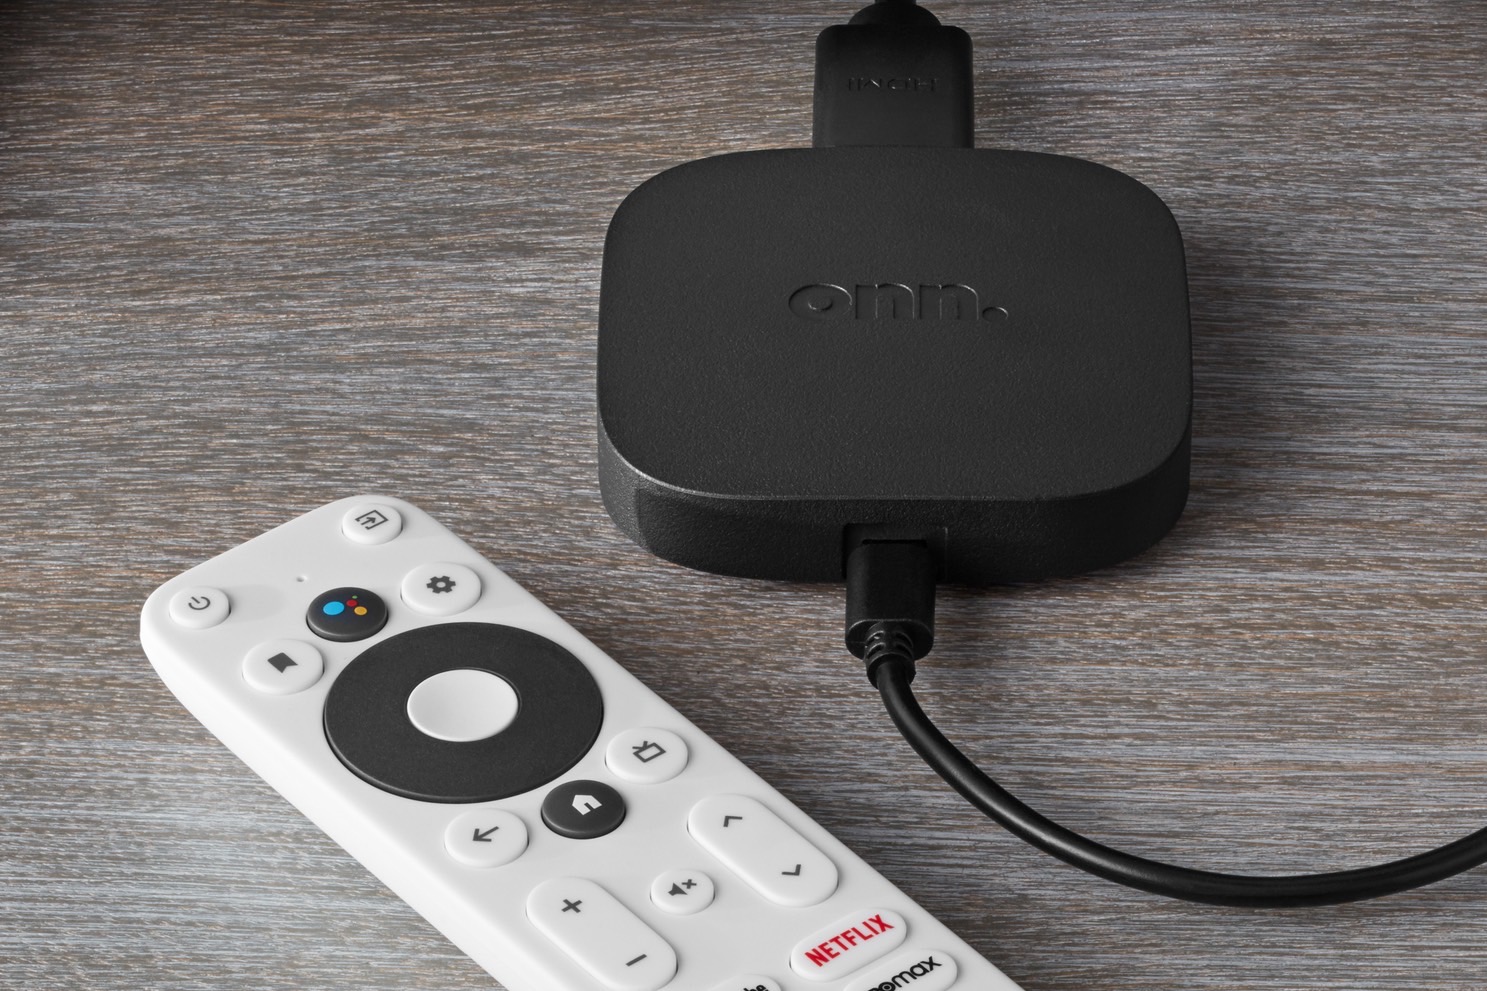 Walmart onn. Android TV streaming device